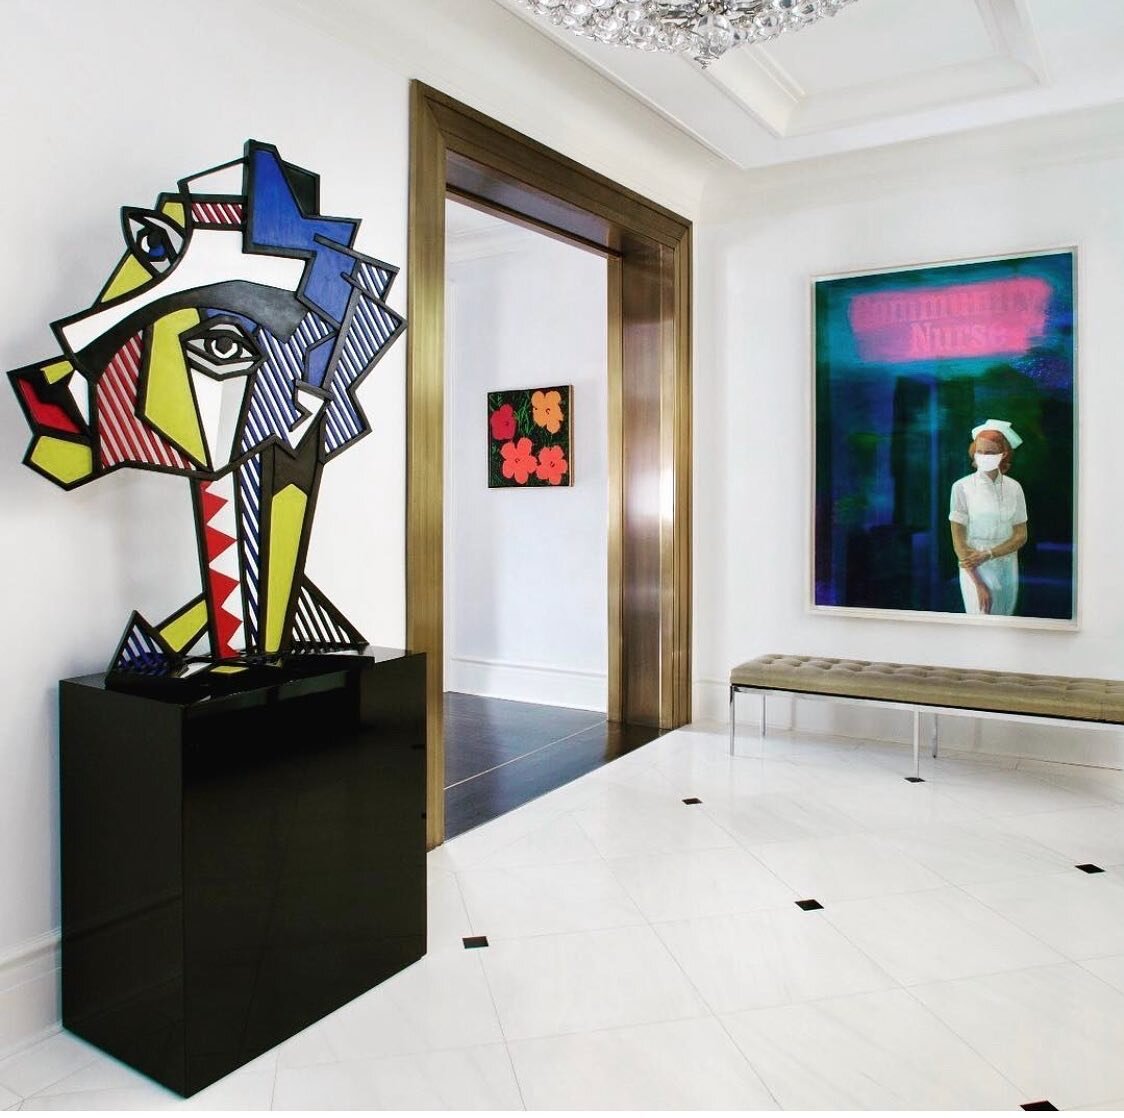 Punchy Foyer Art, featuring Richard Prince, Andy Warhol &amp; Roy Lichtenstein⁠
#theviewingroom #theviewingroomhk #consignmentart #interiordesign #contemporaryart #art #artconsignment #interior #artcollectors #privatecollection #design #livingwithart